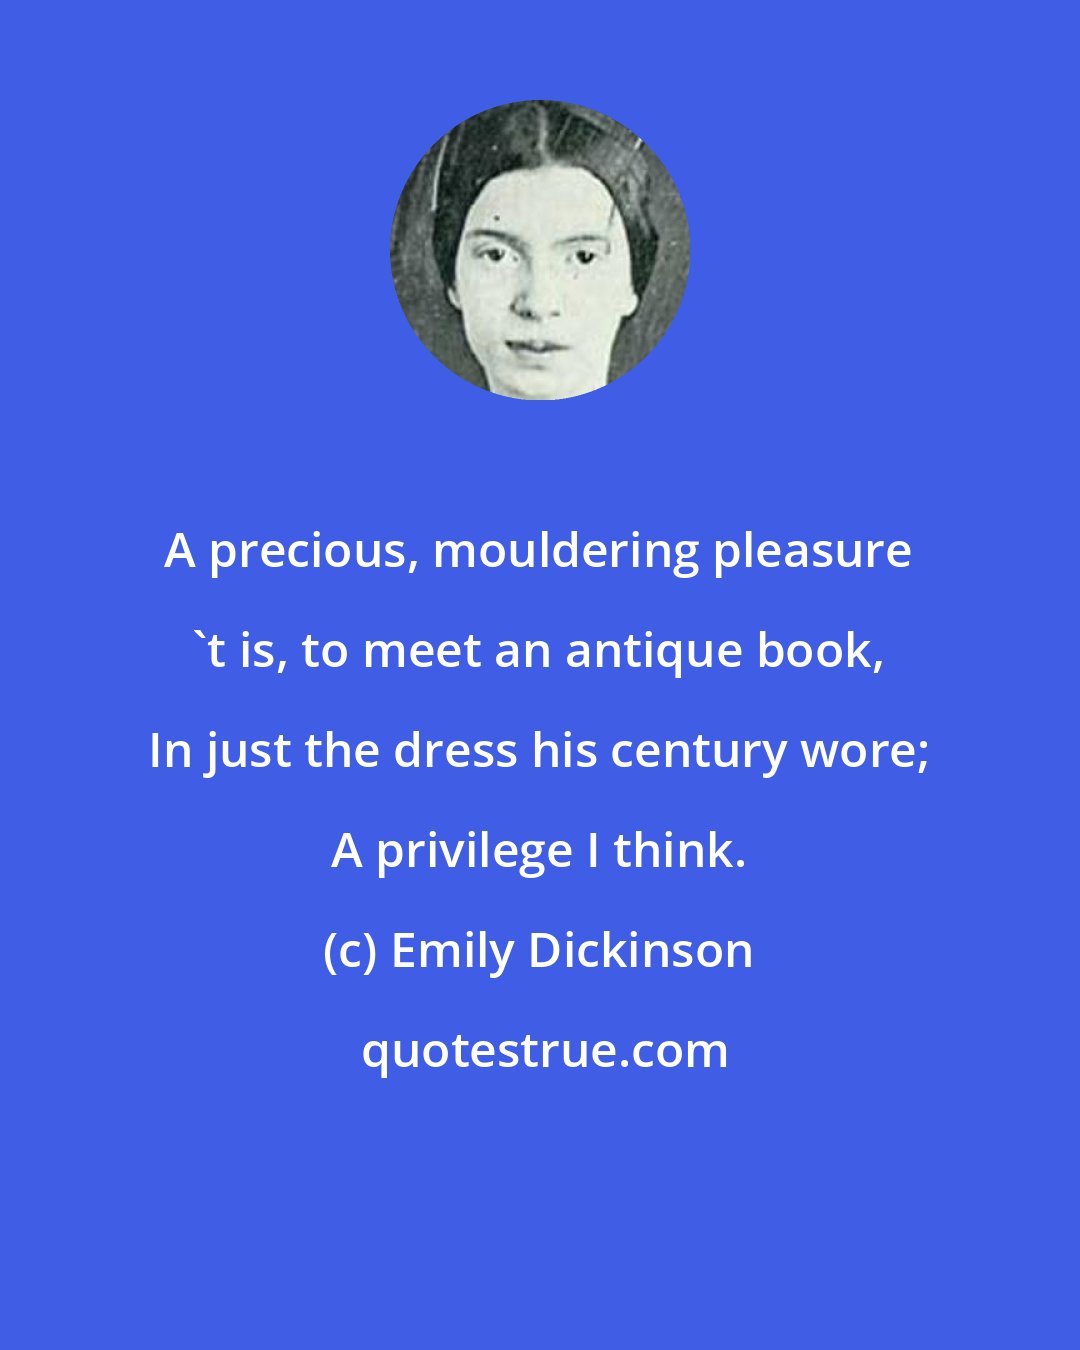 Emily Dickinson: A precious, mouldering pleasure 't is, to meet an antique book, In just the dress his century wore; A privilege I think.